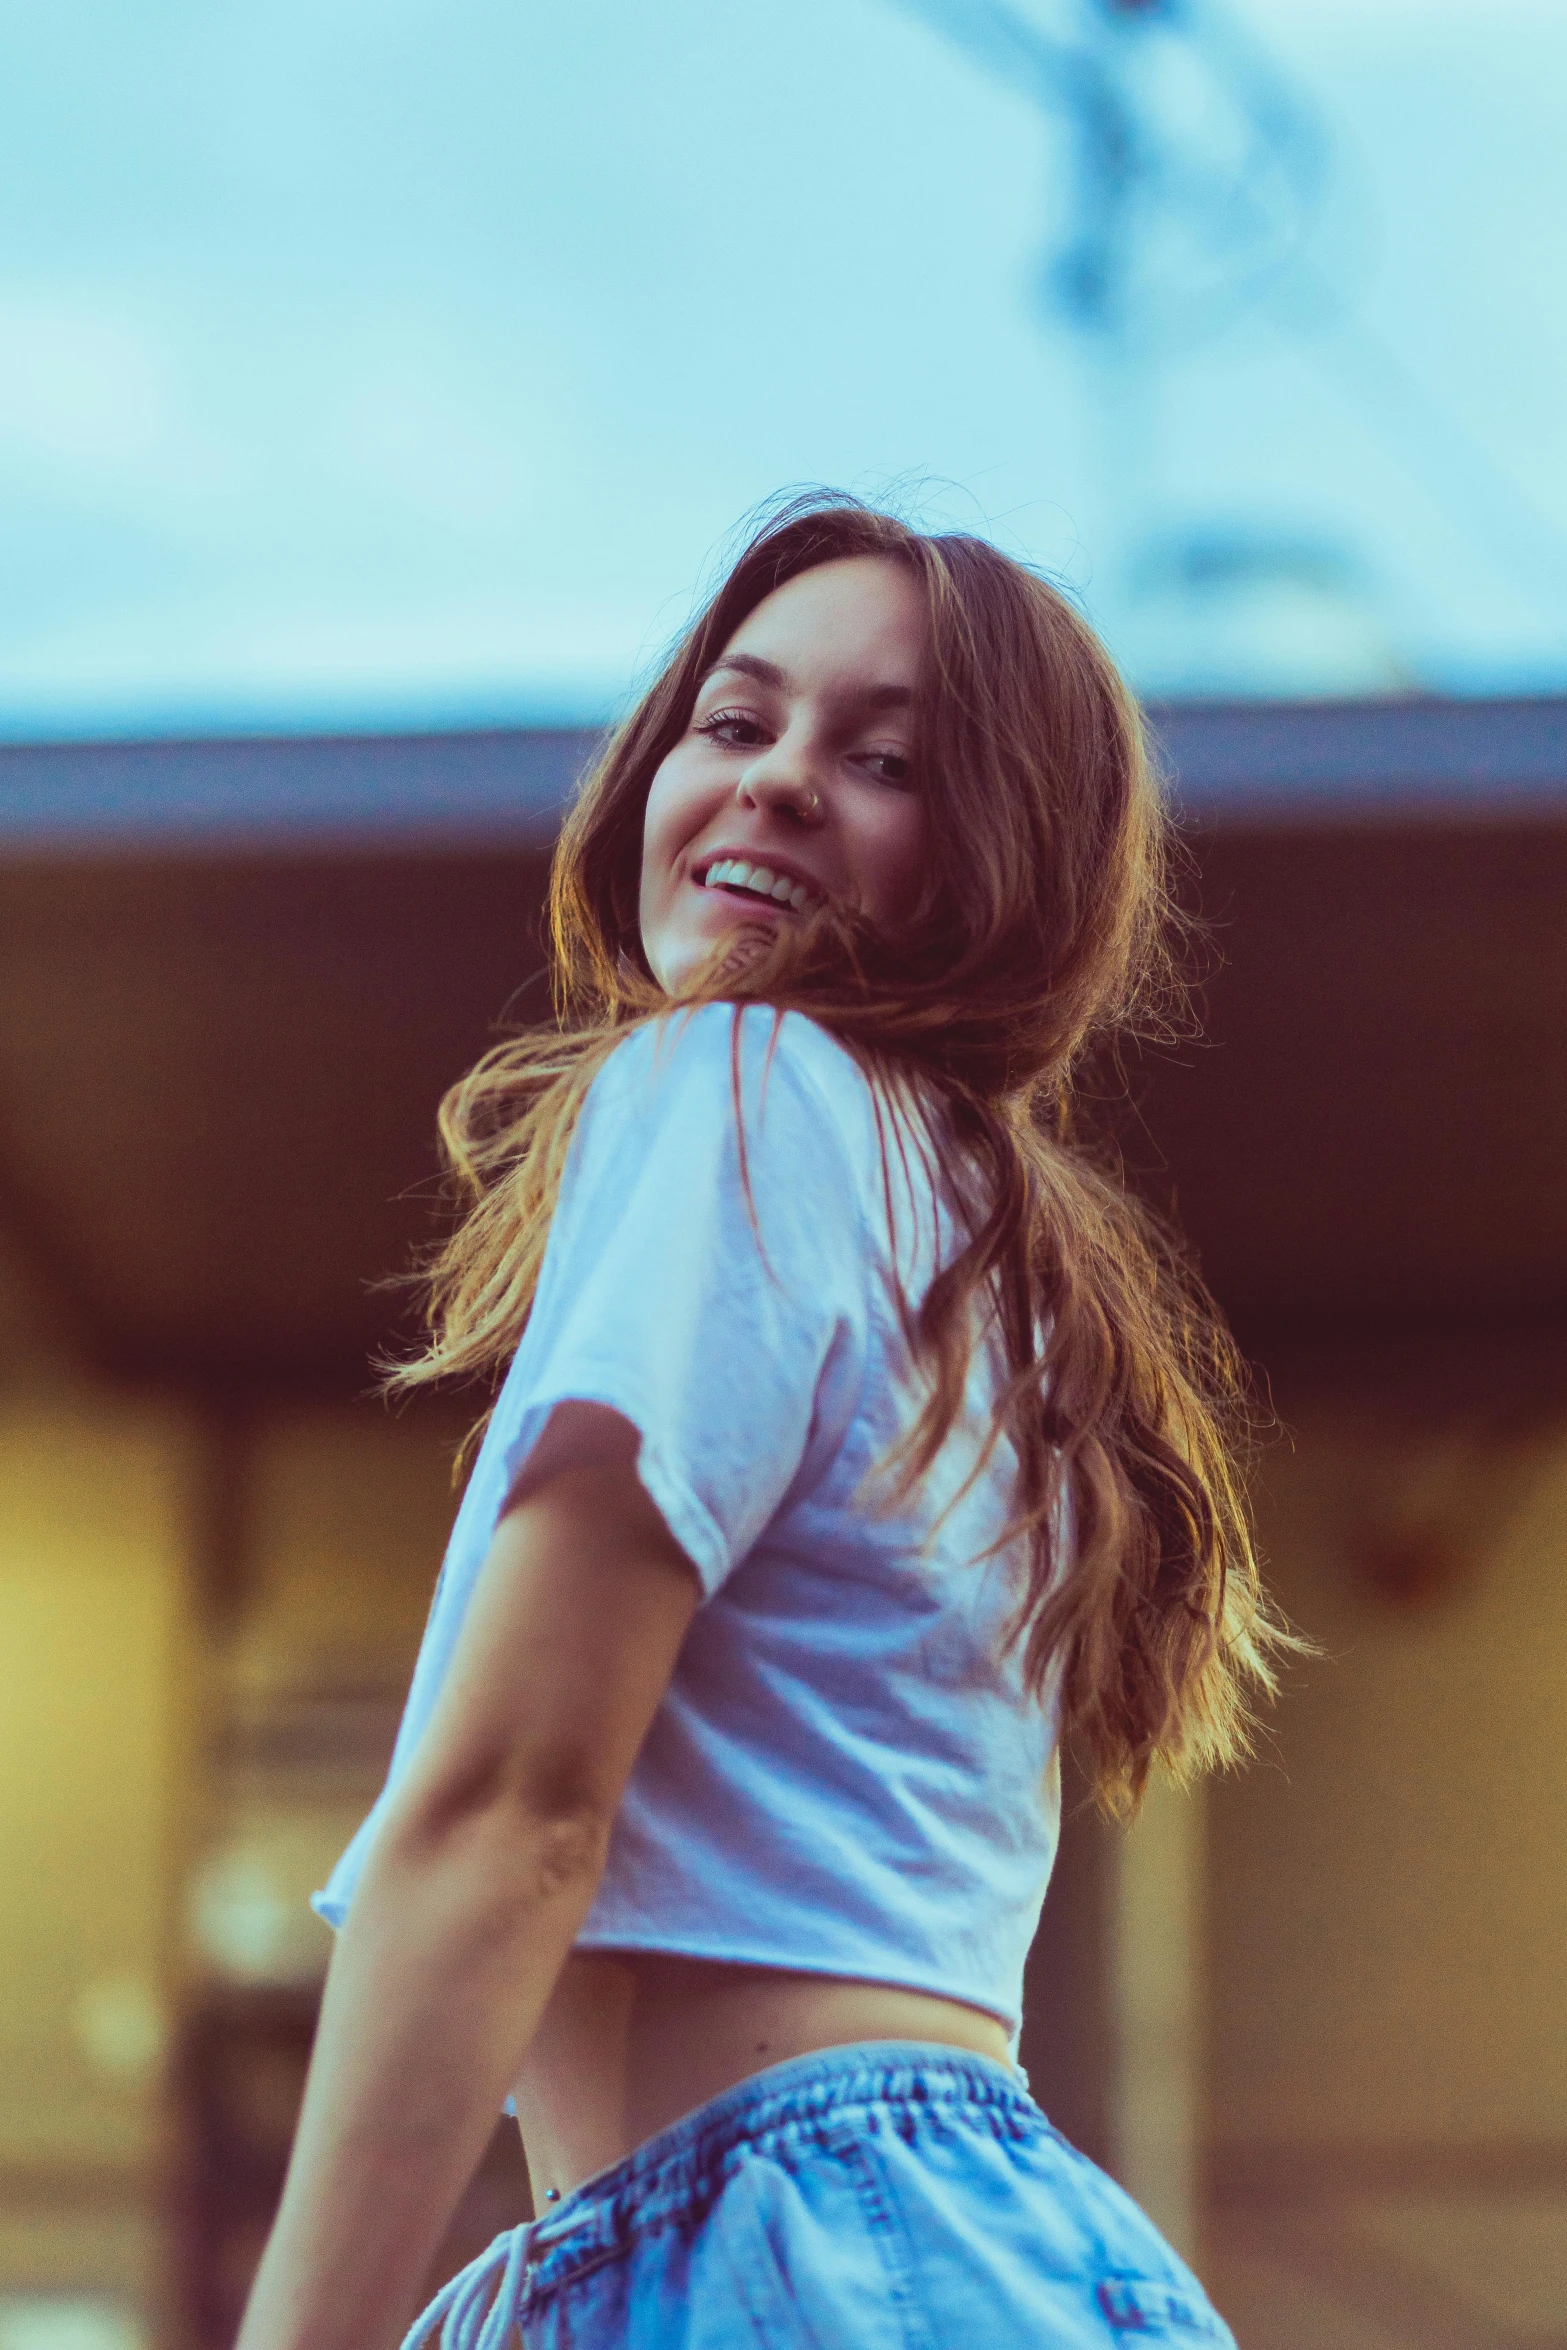 a beautiful young woman standing in front of a building, pexels contest winner, happening, dressed in a white t-shirt, madly grinning, girl with dark brown hair, pokimane